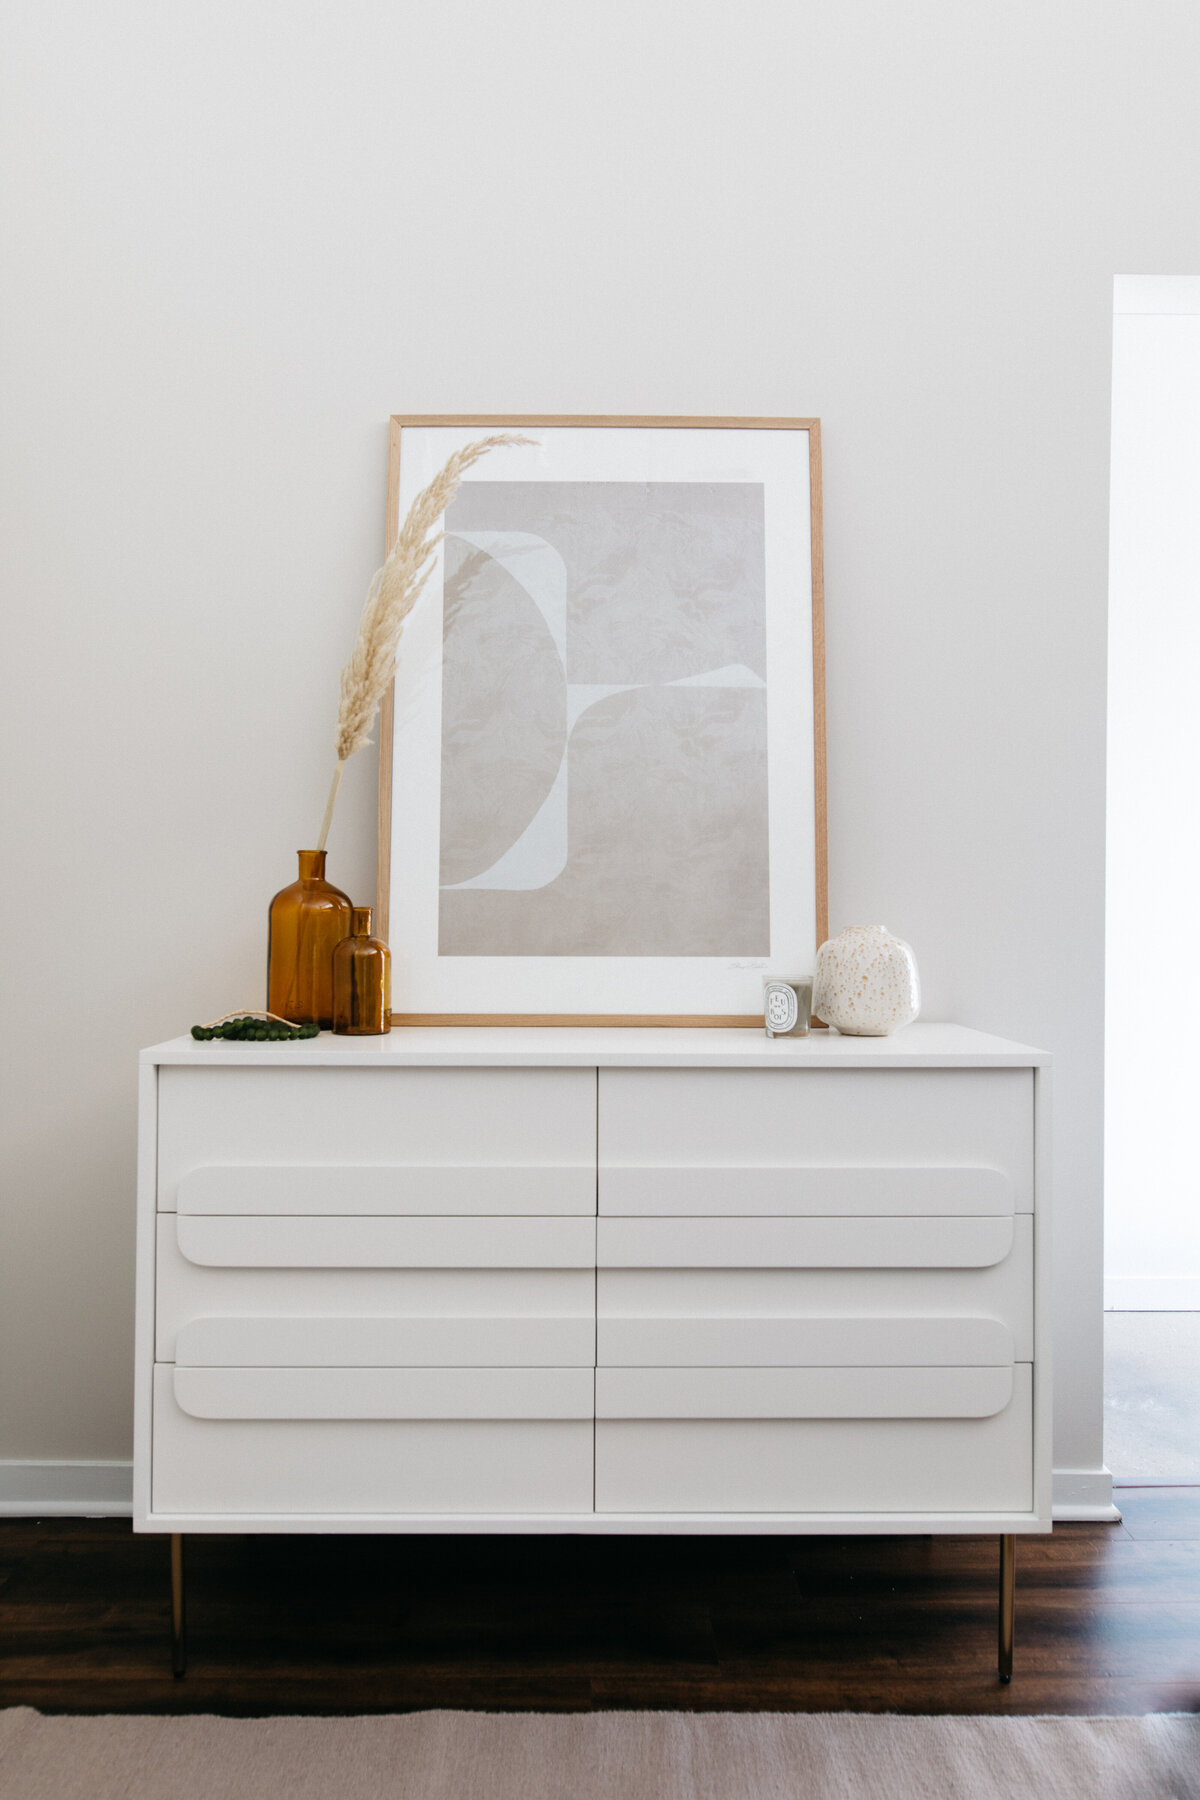 White double dresser with oversize drawer handles. Abstract grey beige wood framed artwork on top leaning against wall. Amber glass bottle vases styled with pampas grass and candle and ceramic vasein front